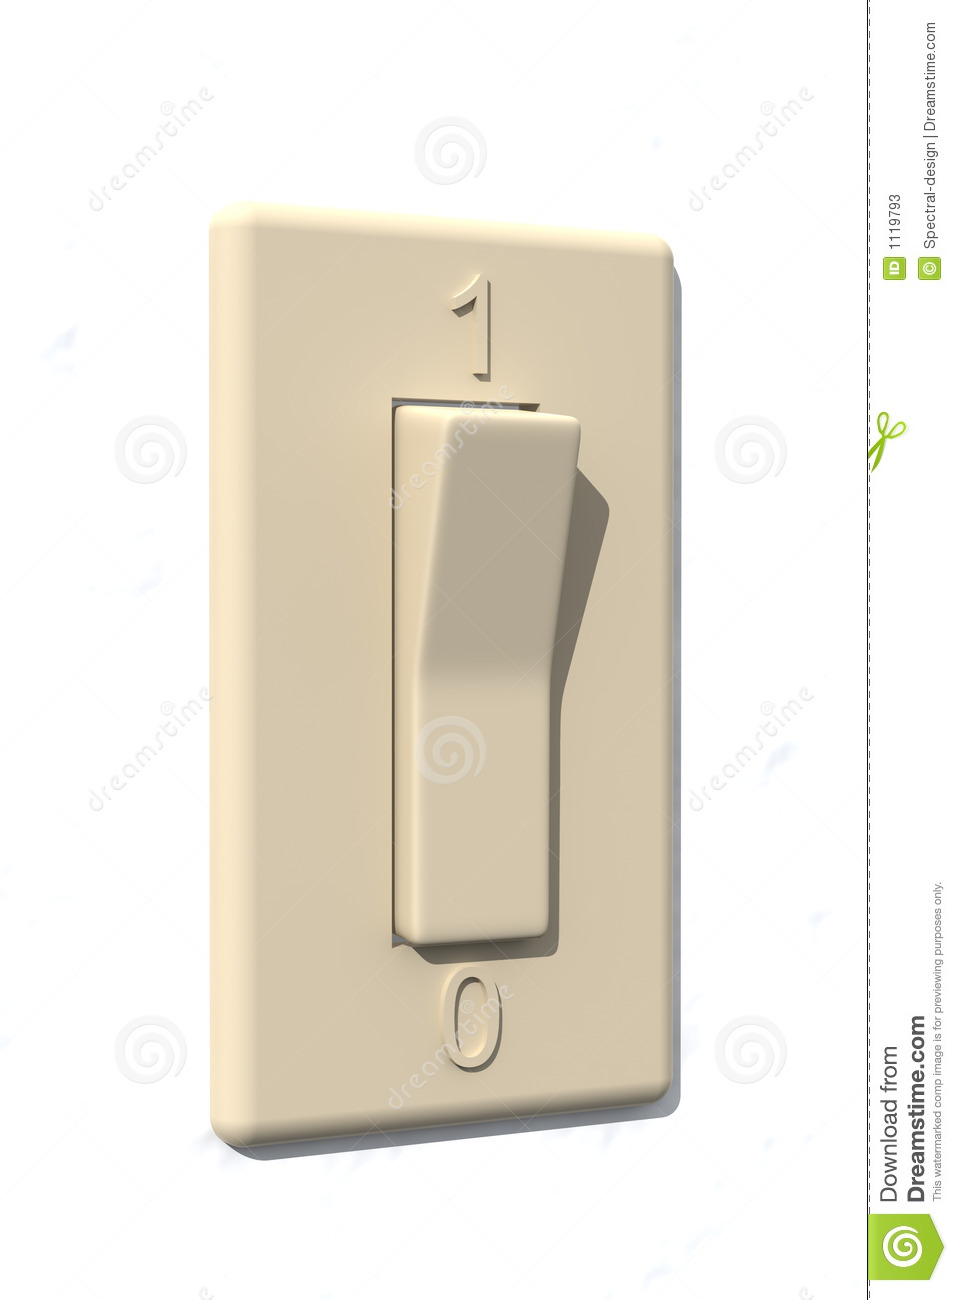 Switch   Off Stock Photos   Image  1119793